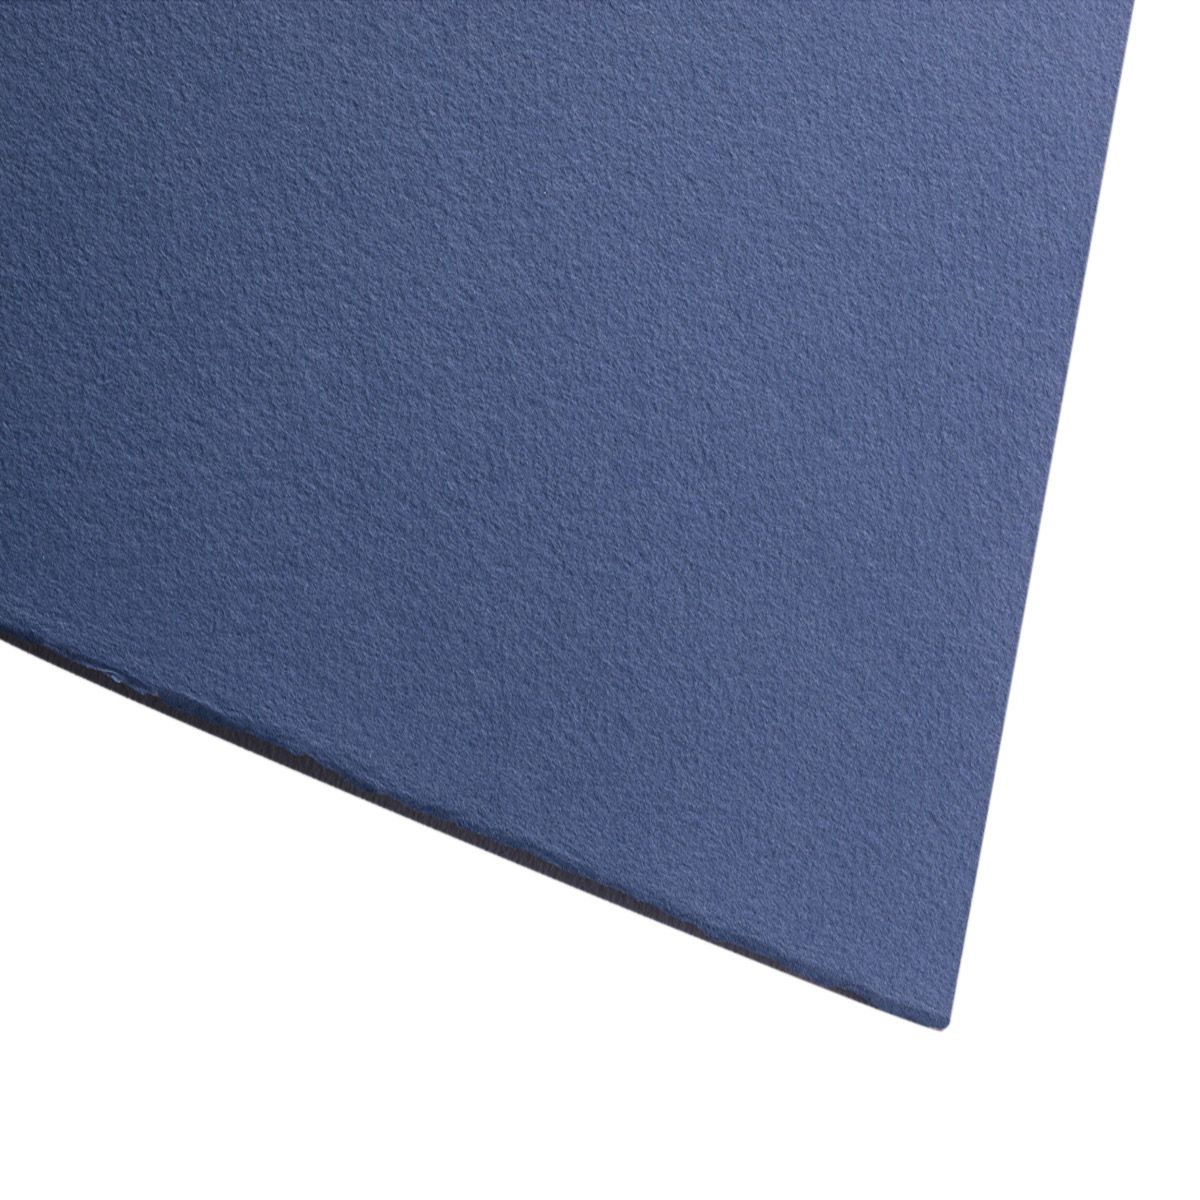 Fabriano Cromia Paper Sheet Blue 19.6" x 25.5"